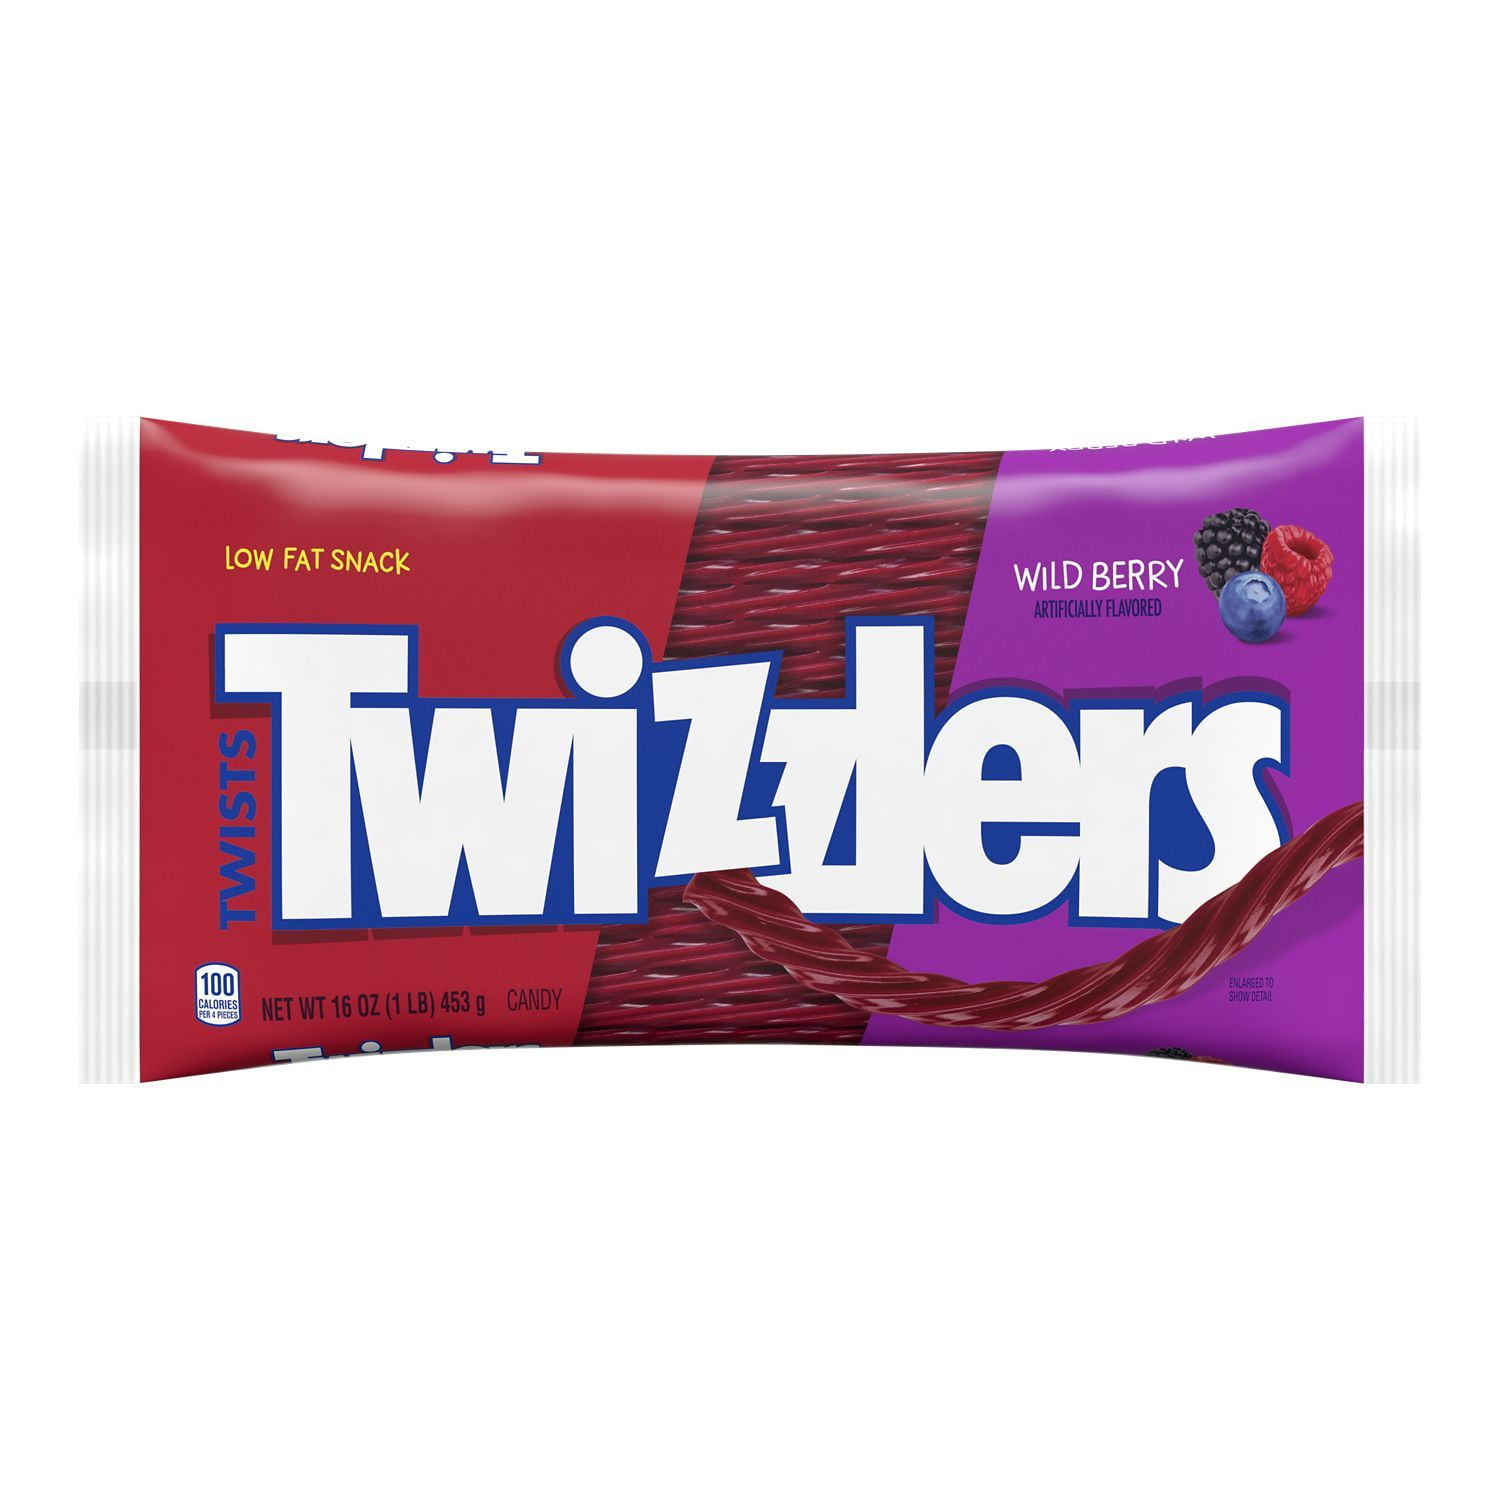 TWIZZLERS, Twists Wild Berry Flavored Chewy Candy, Low Fat Snack, 16 oz, Bag